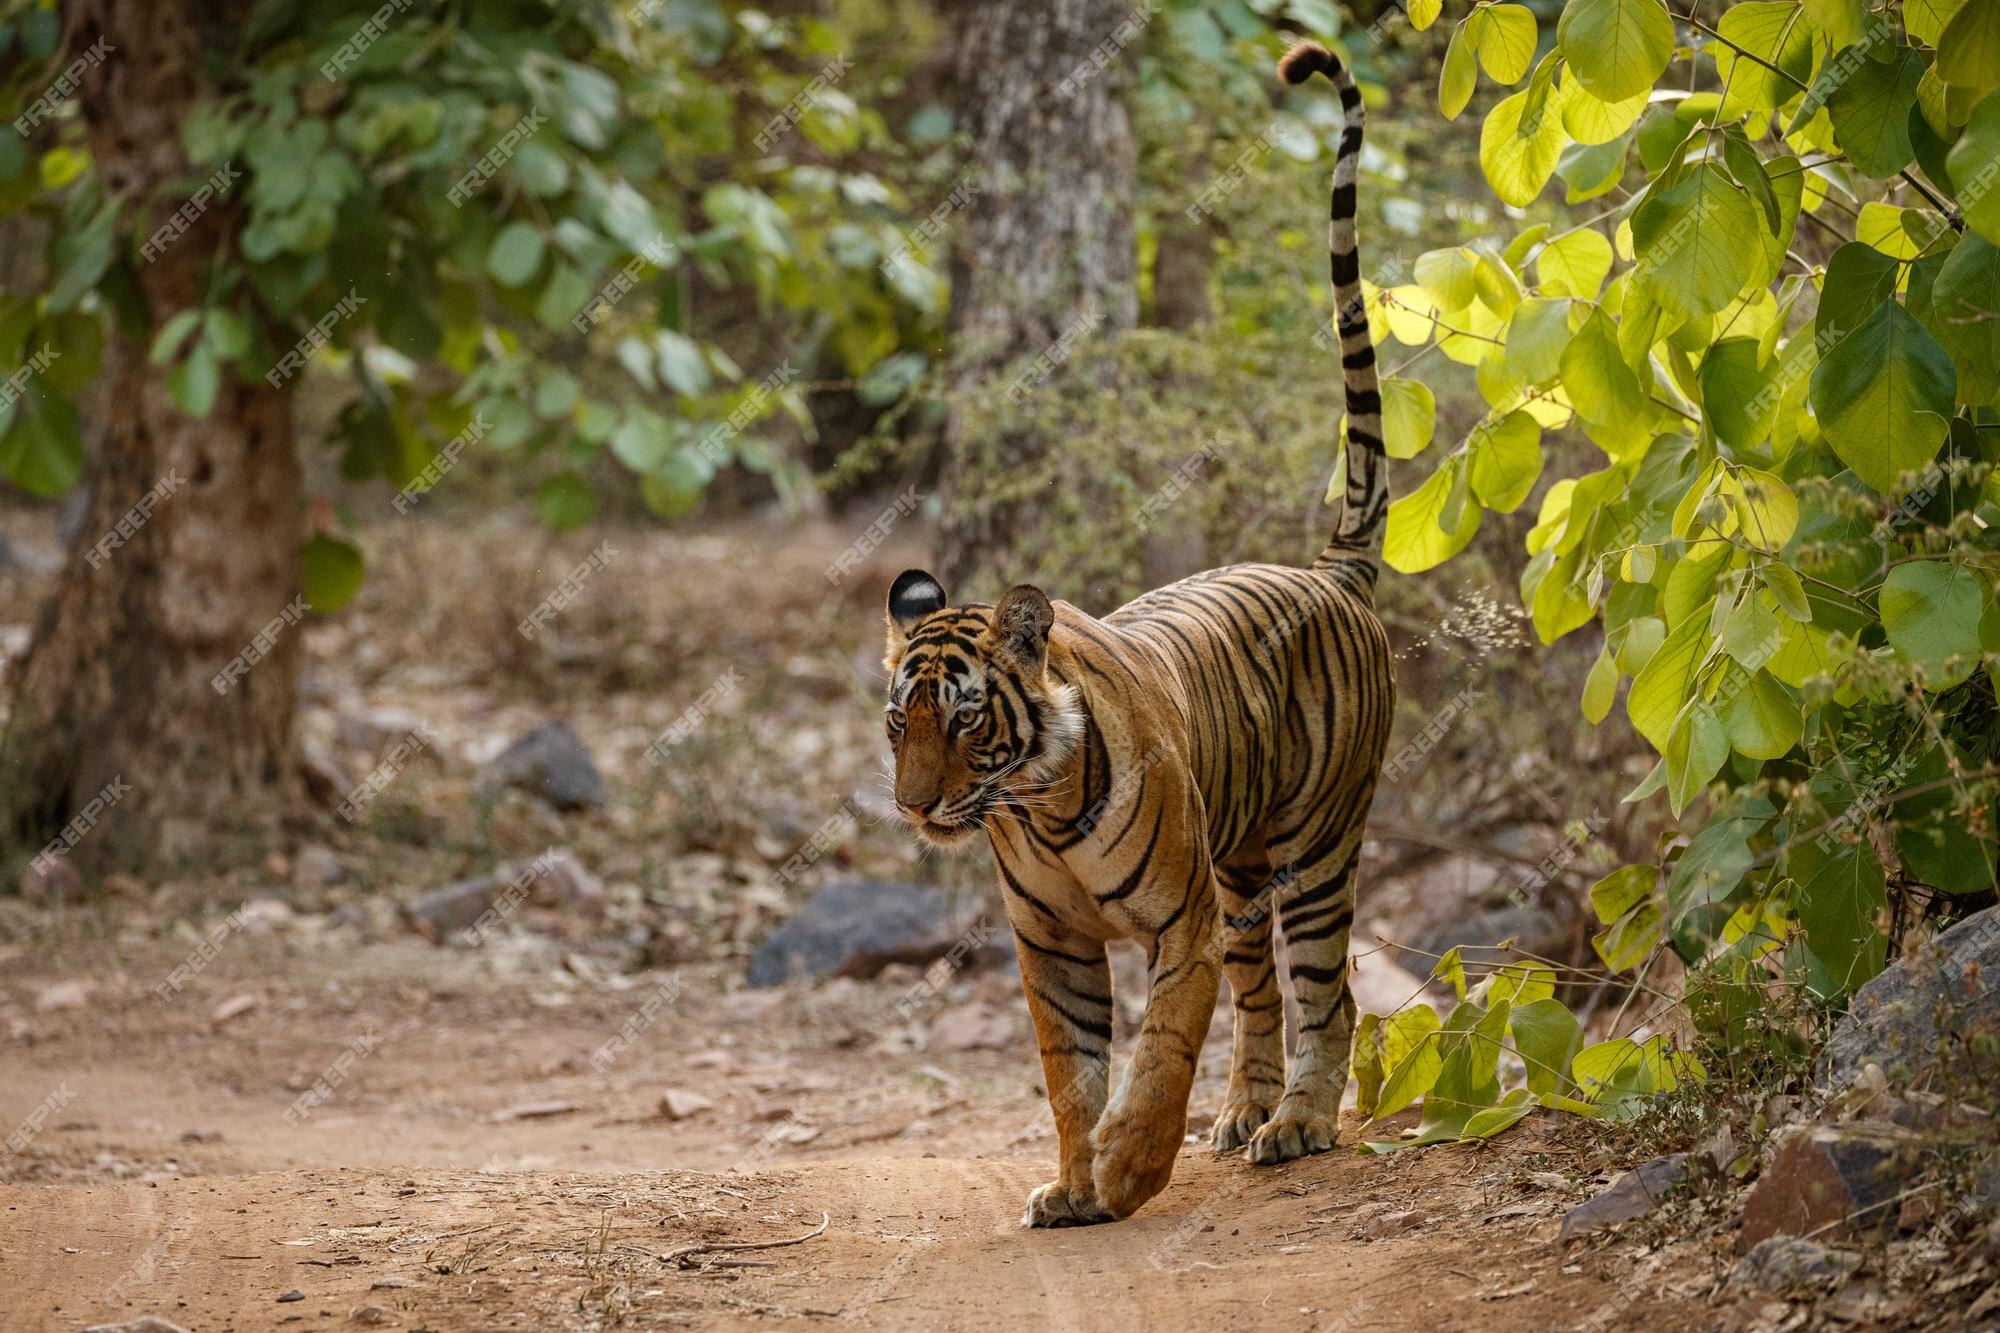 Free Photo | Tiger in the nature habitat tiger male walking head on  composition wildlife scene with danger animal hot summer in rajasthan india  dry trees with beautiful indian tiger panthera tigris